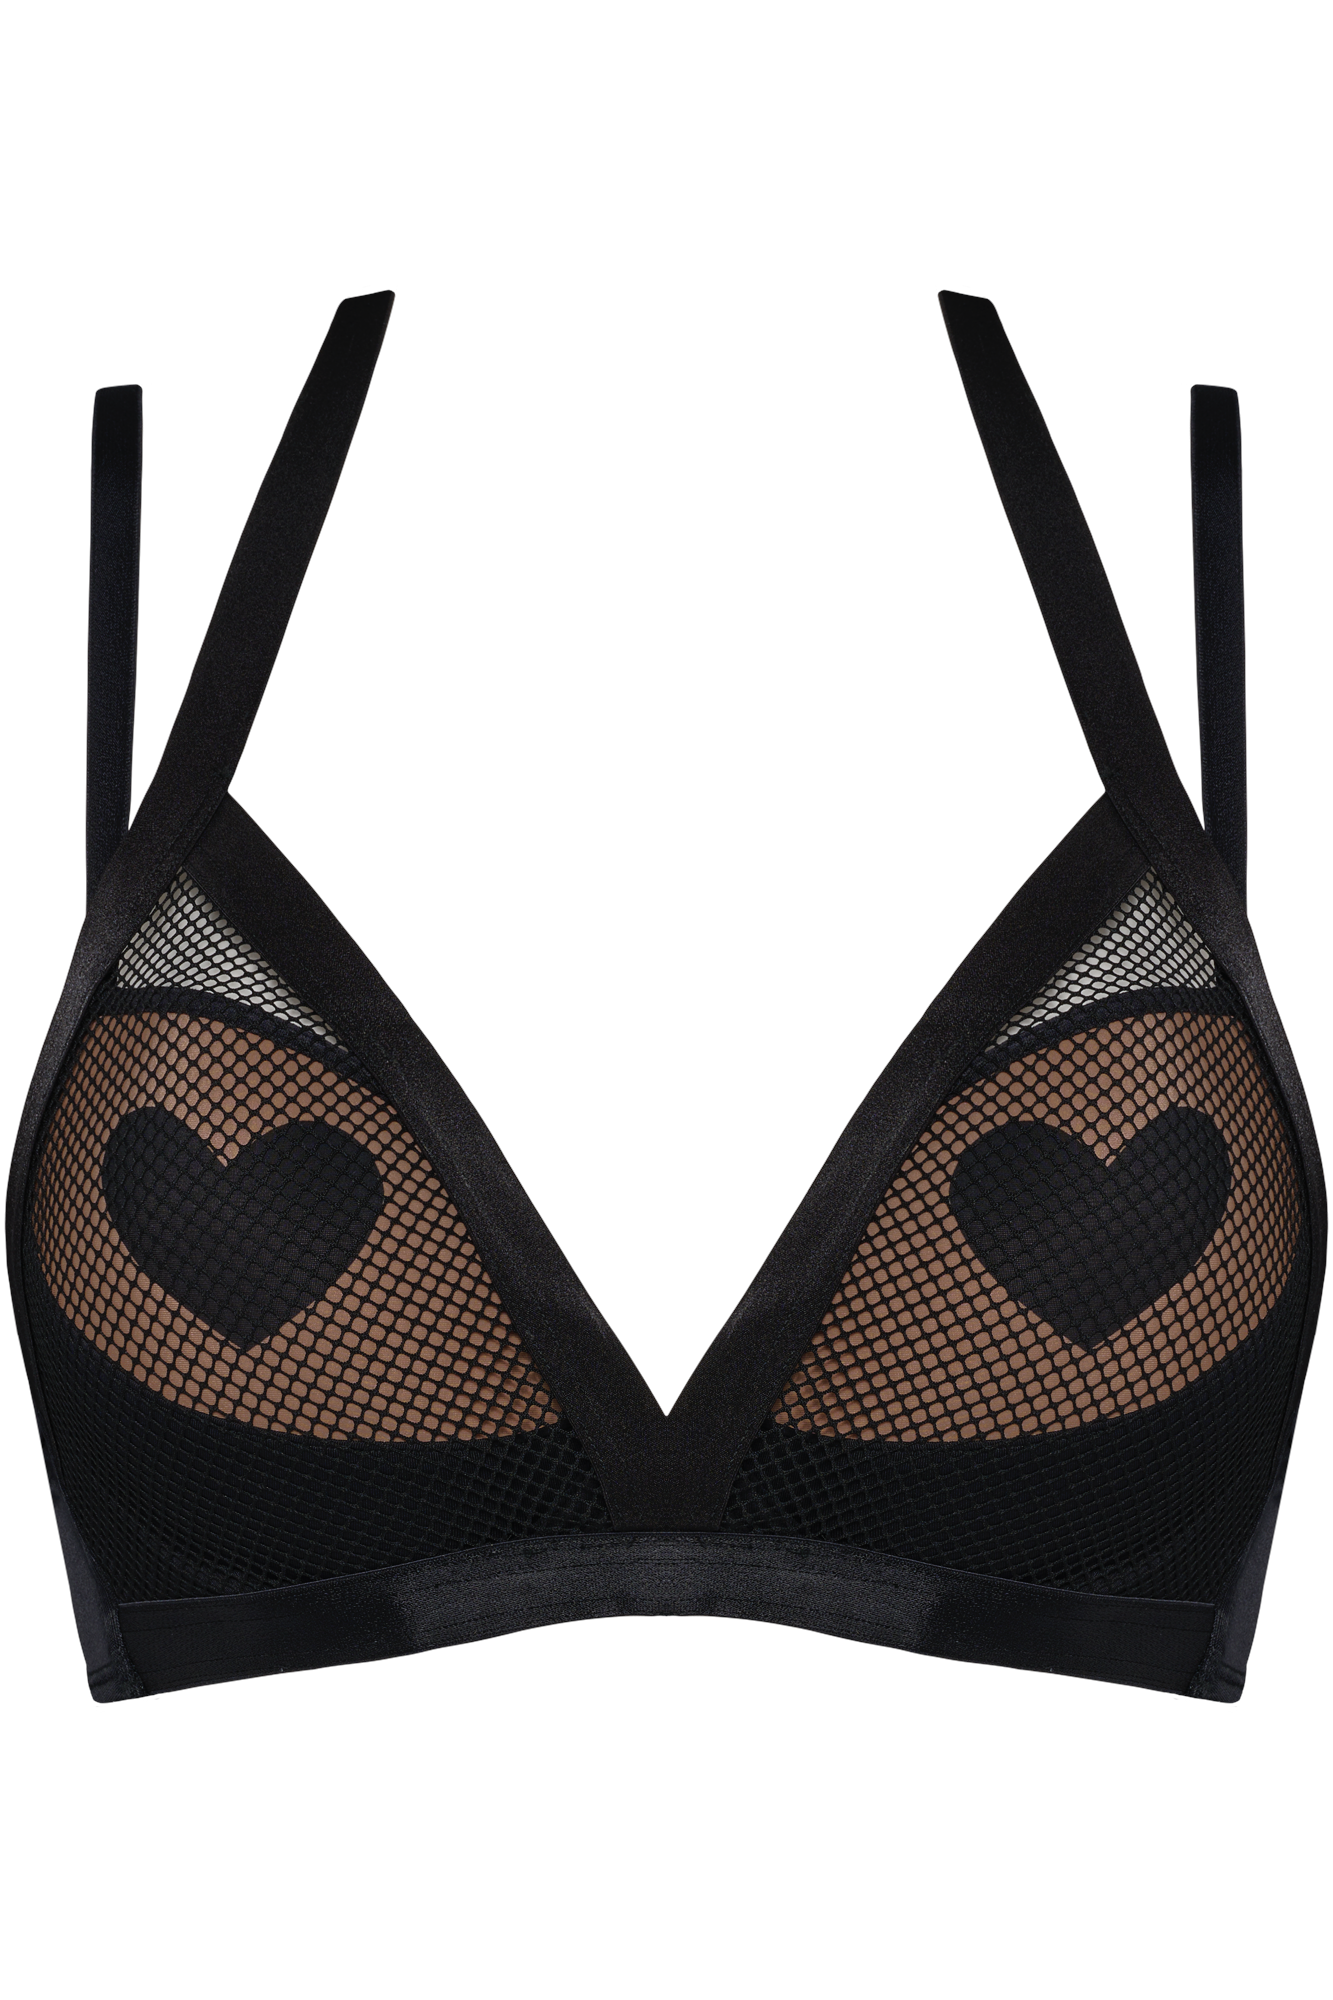 Marlies Dekkers heartbreaker push up bh wired padded black mesh and sand